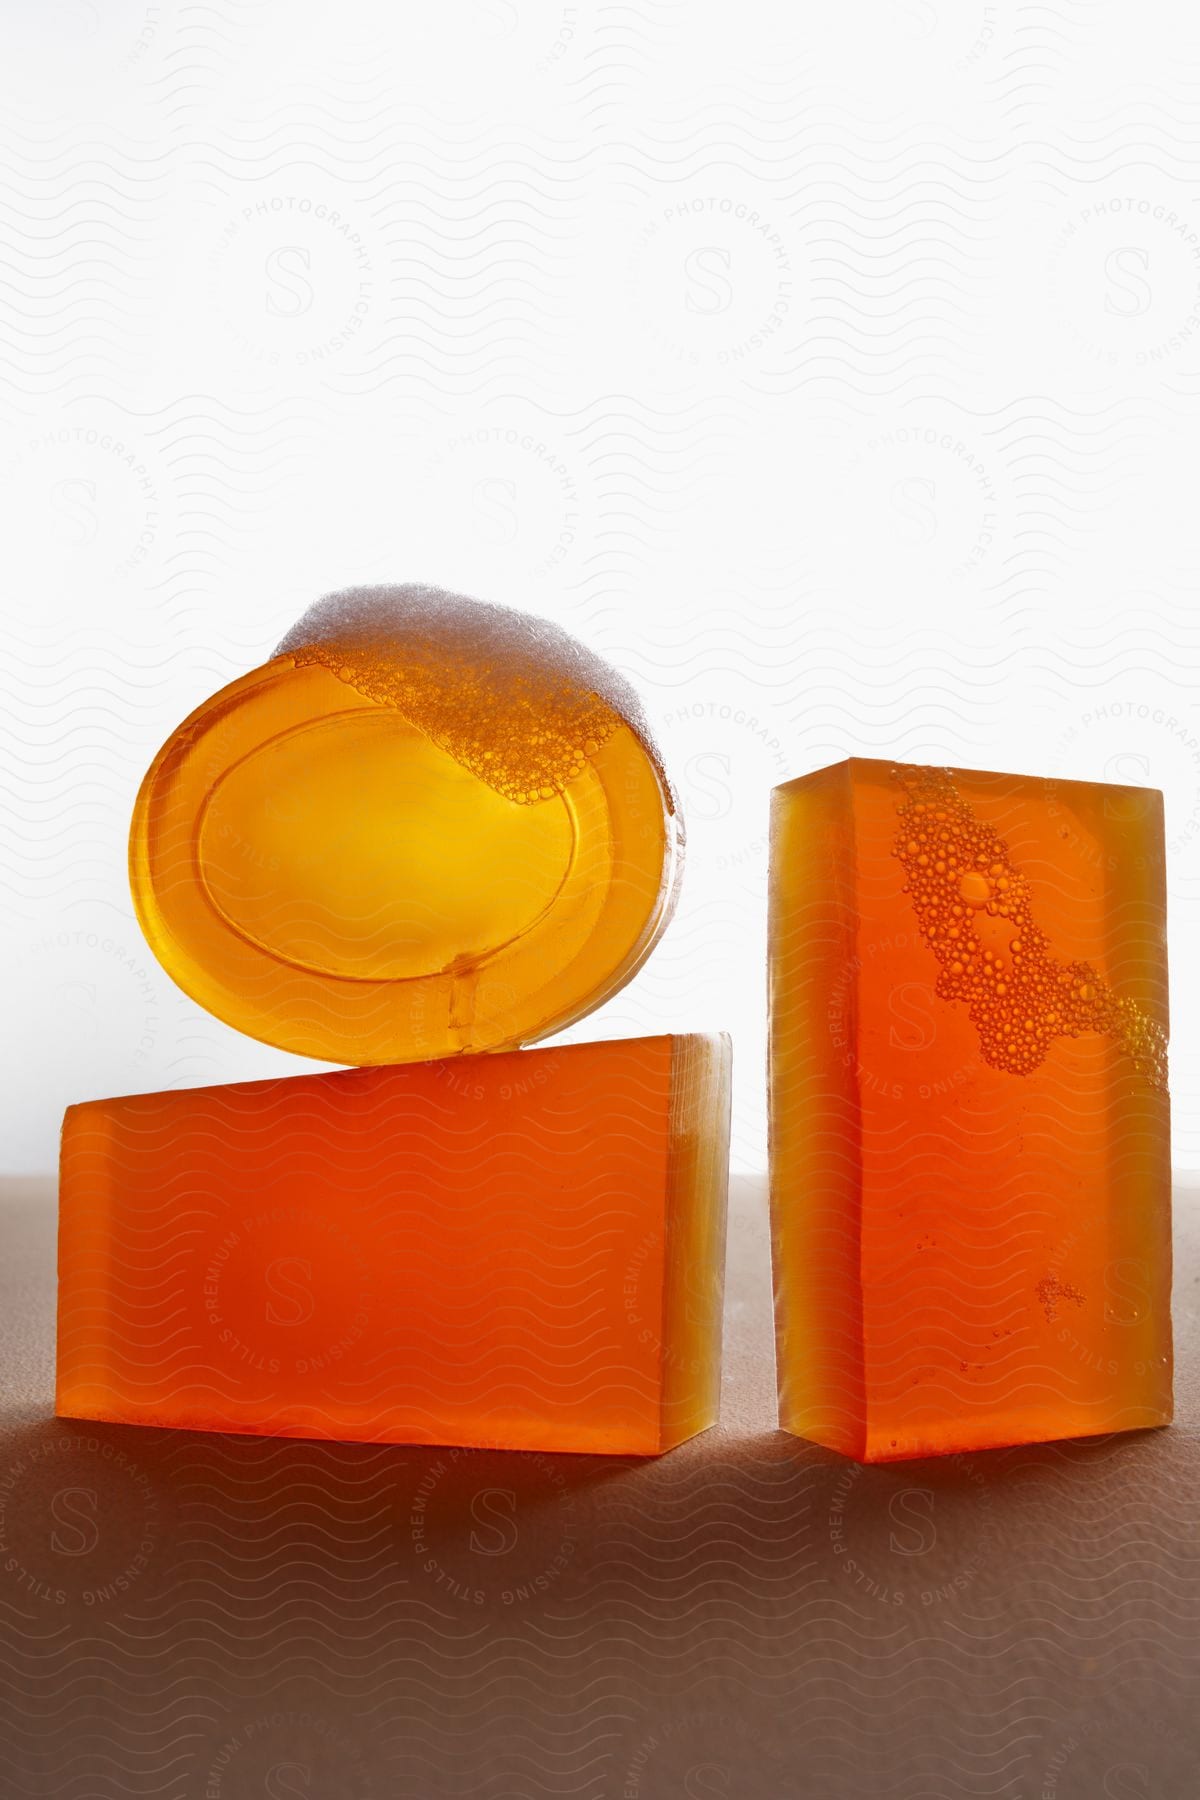 Translucent bars of soap stand on edge with bubbles on the surface